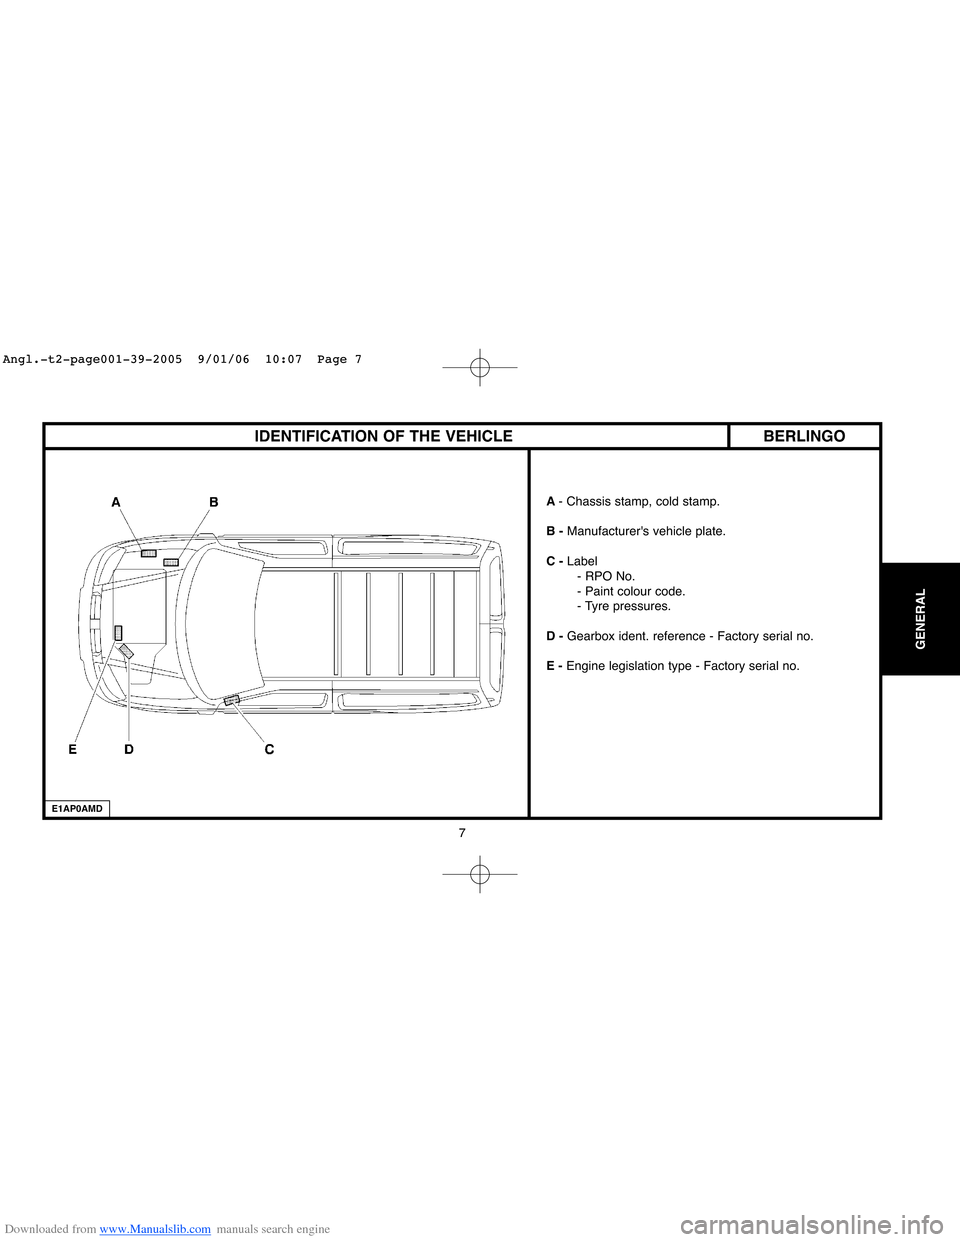 Citroen C4 2005 2.G User Guide Downloaded from www.Manualslib.com manuals search engine 7
GENERAL
BERLINGO IDENTIFICATION OF THE VEHICLE
E1AP0AMD
A- Chassis stamp, cold stamp.
B - Manufacturers vehicle plate.
C -Label
- RPO No.
- 